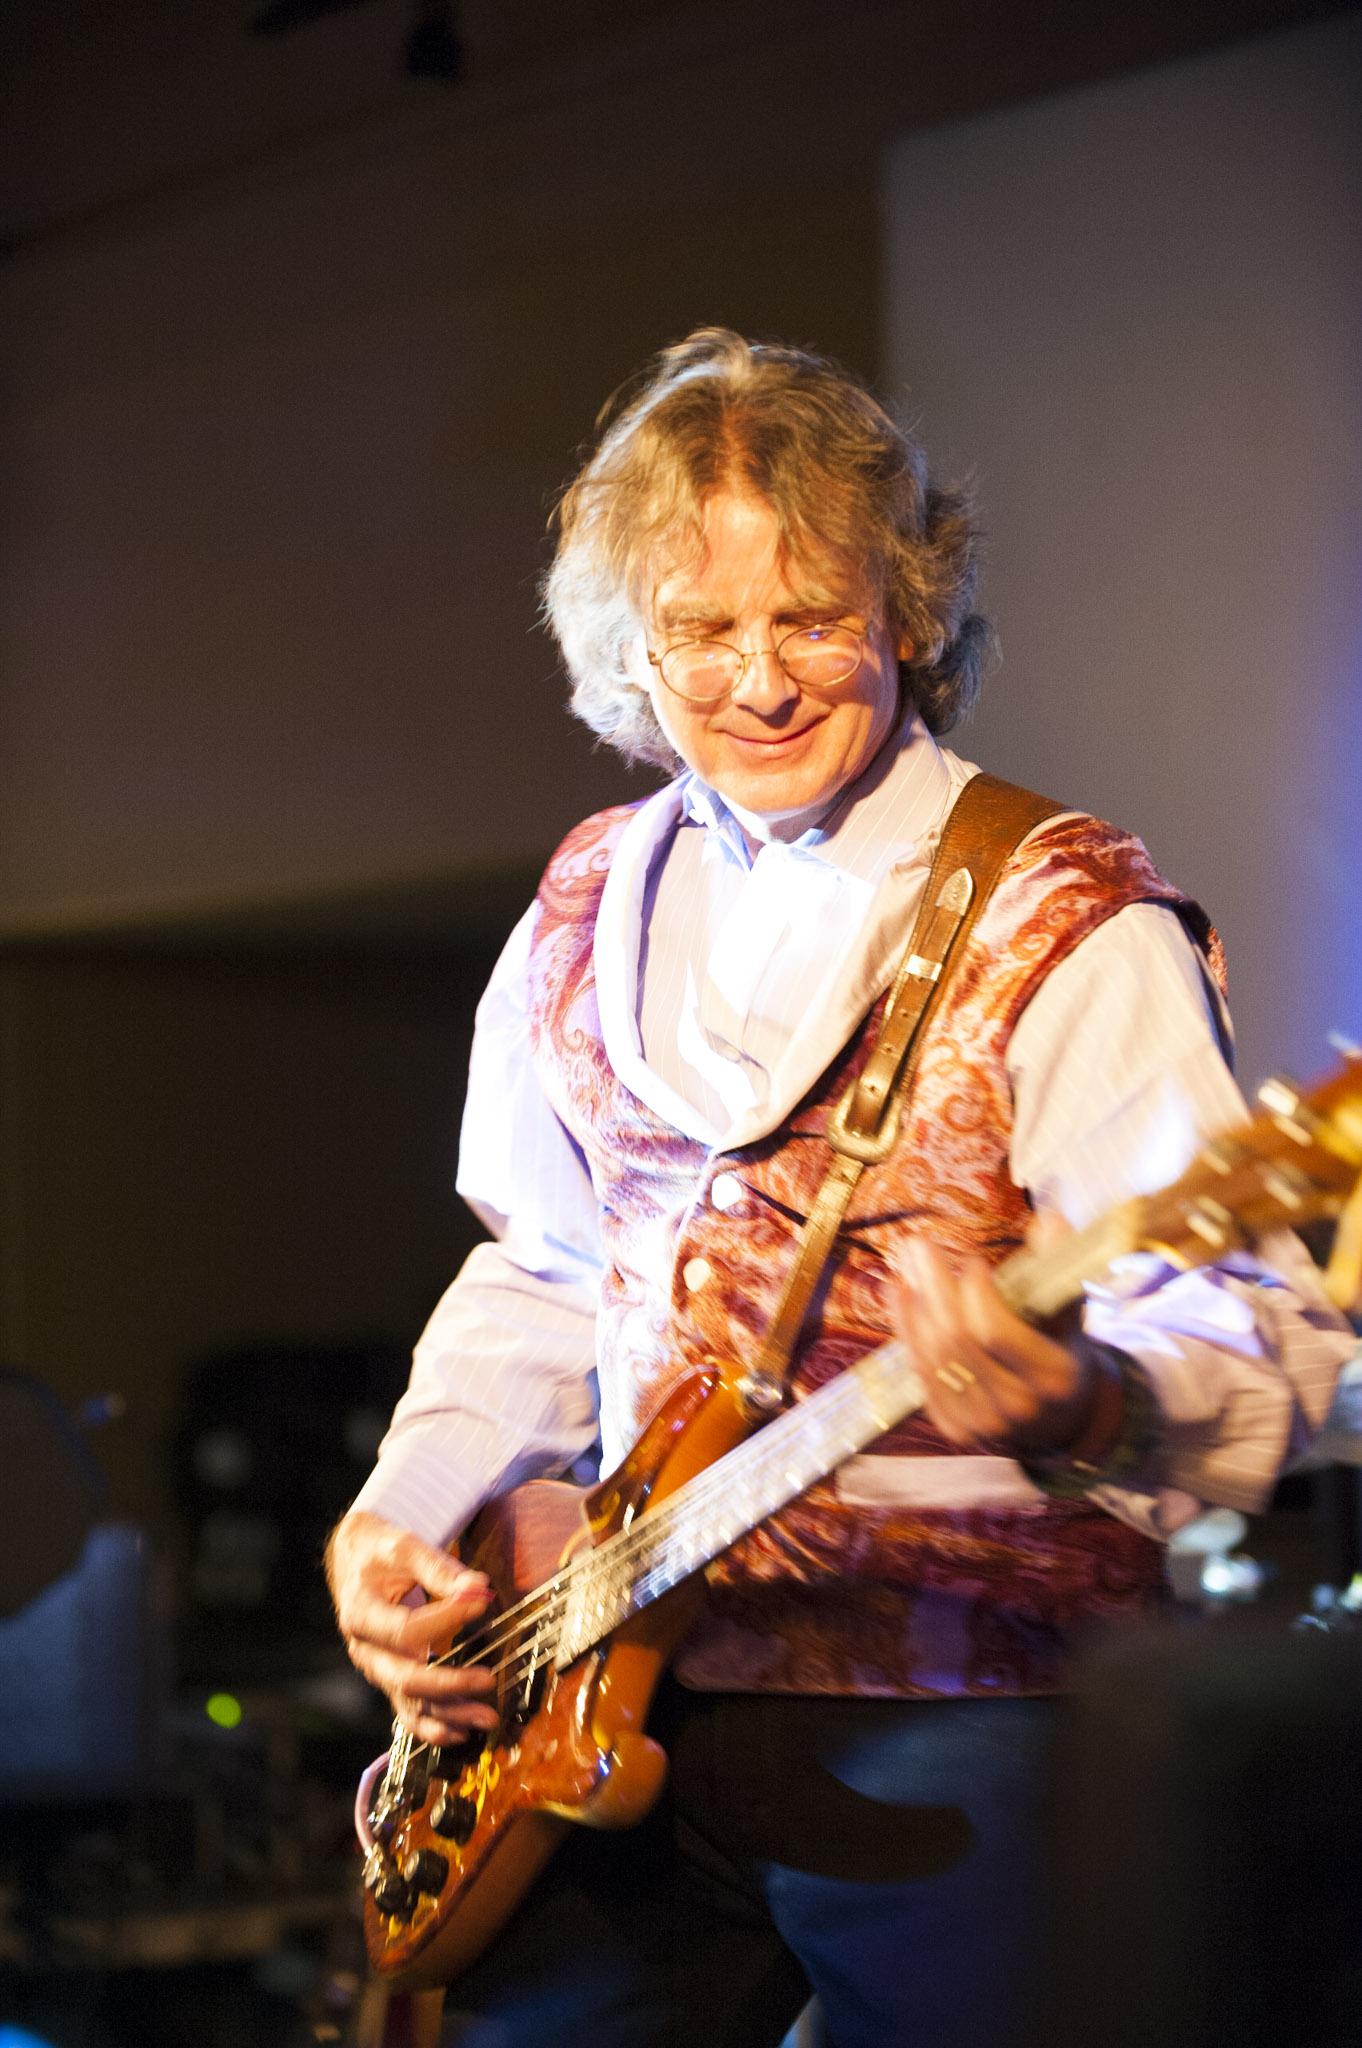 STAR // Connor GibsonBassist and vocalist Roger McNamee took the stage at Sally Tomatoes for a psychedelic evening.